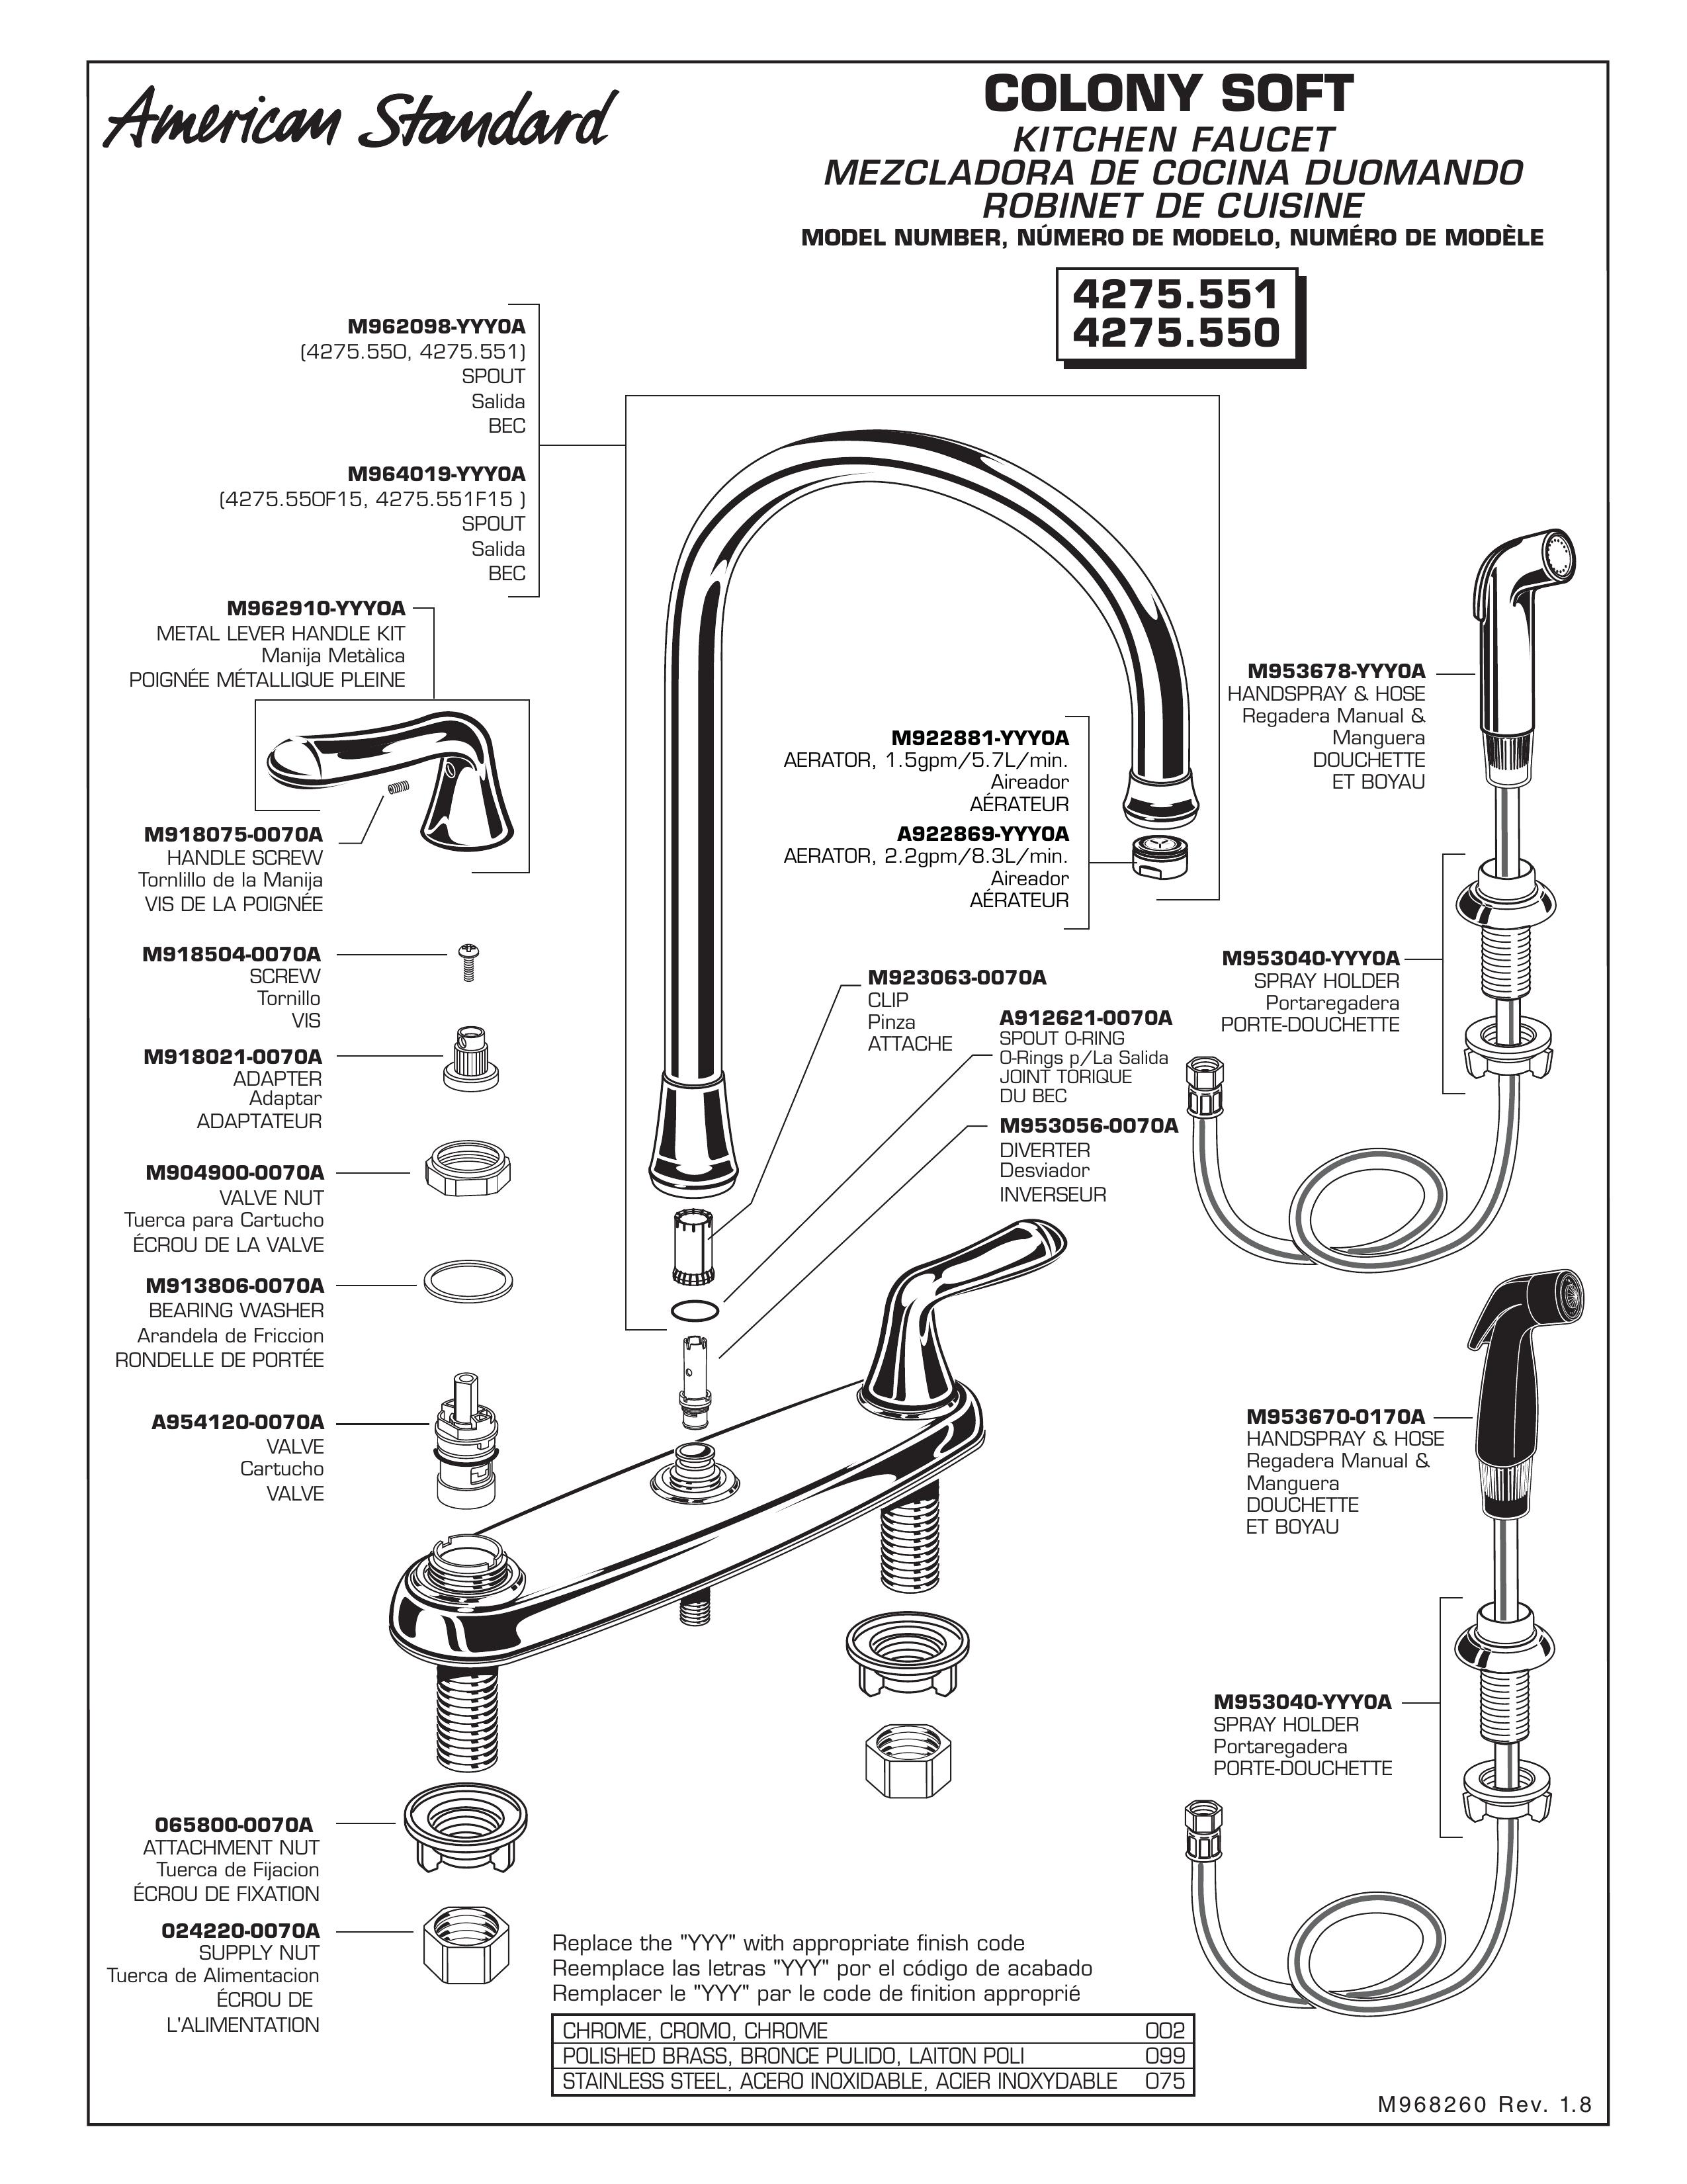 American Standard Kitchen Faucet Outdoor Kitchen Island User Manual